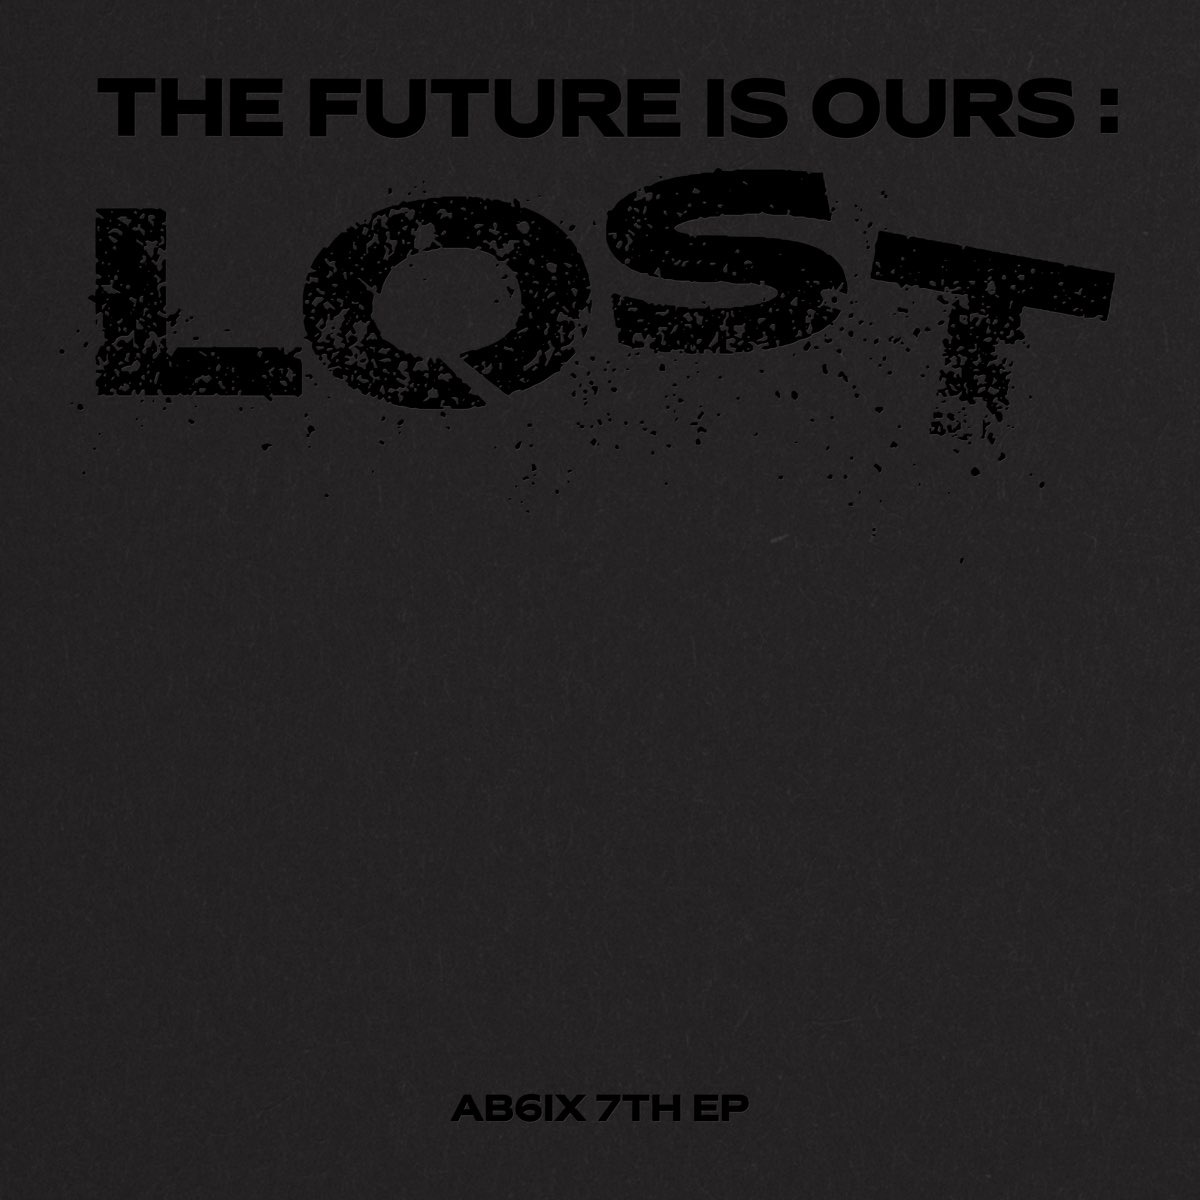 AB6IX — The Future is Ours: Lost cover artwork